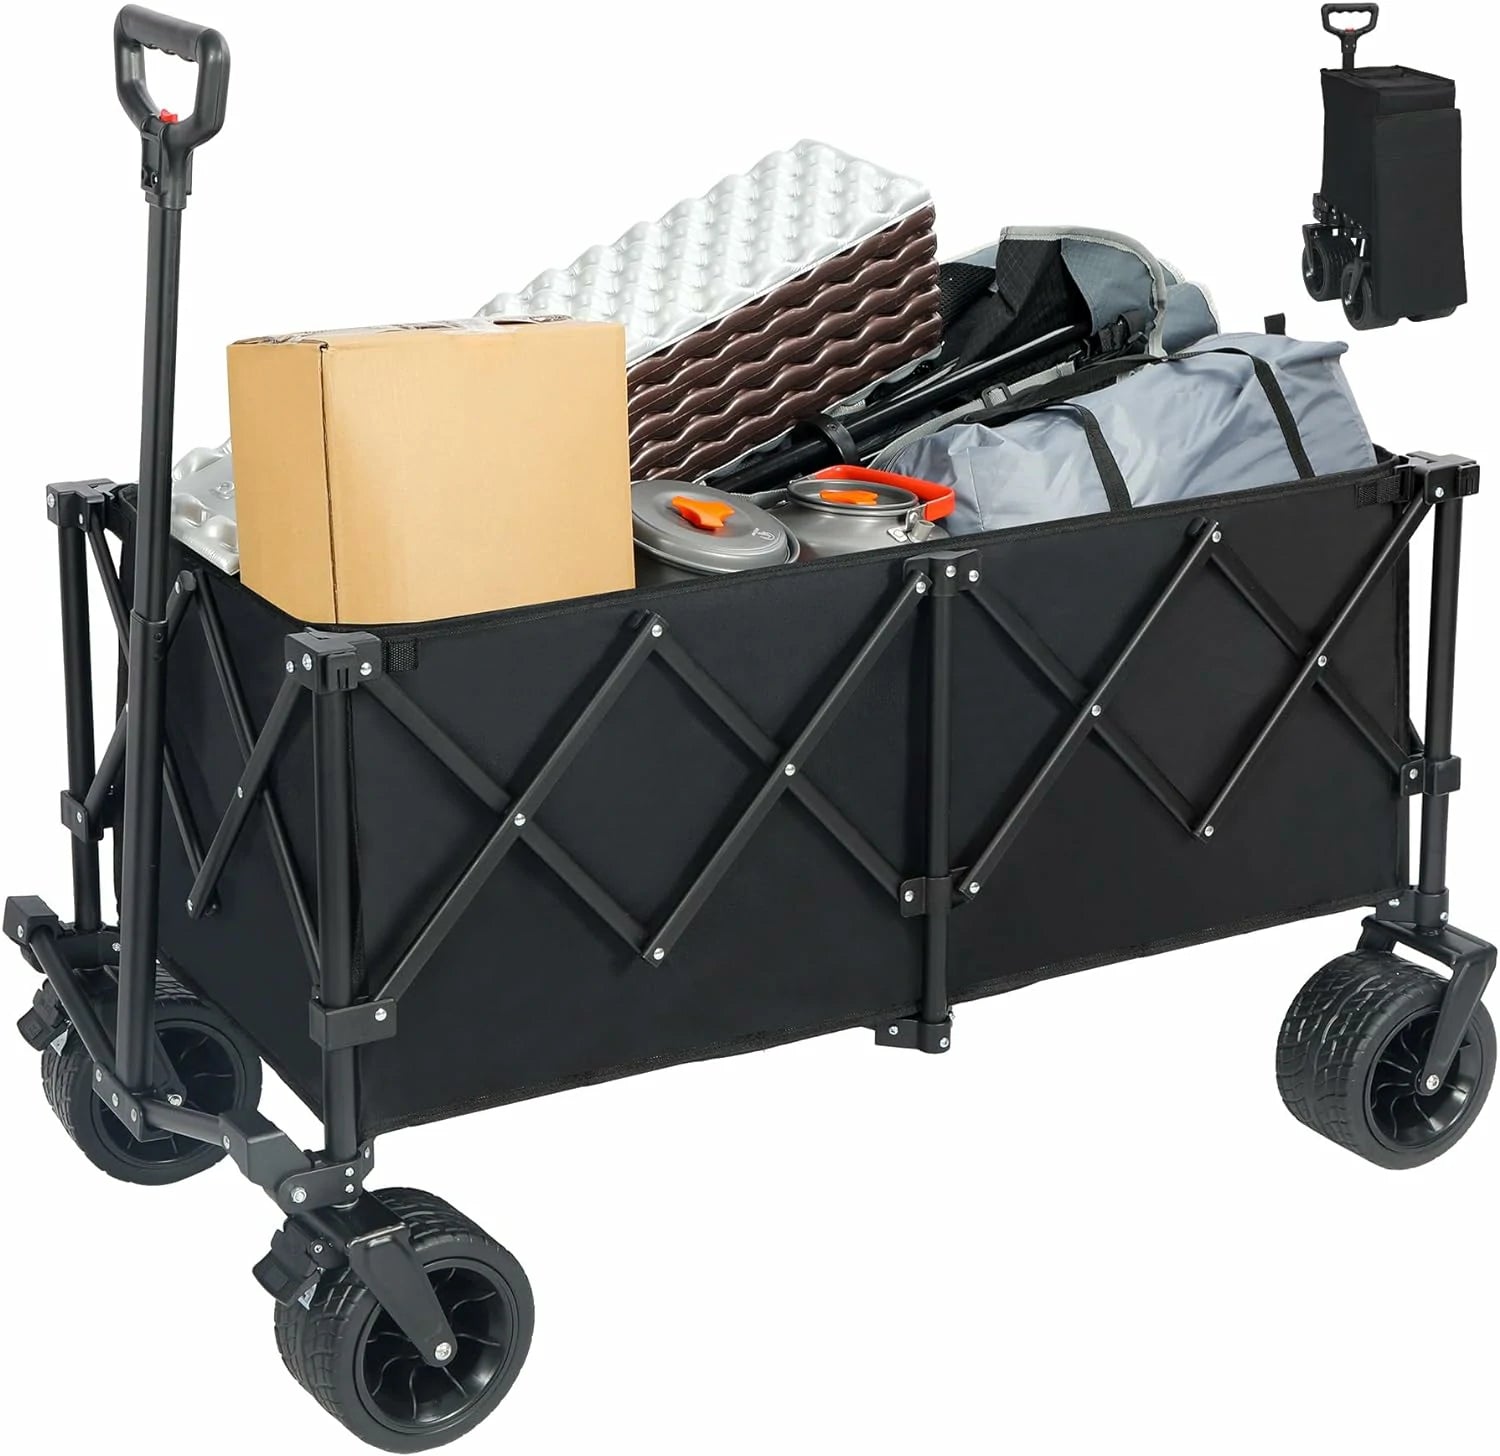 REDCAMP Extra Large Collapsible Wagon Cart